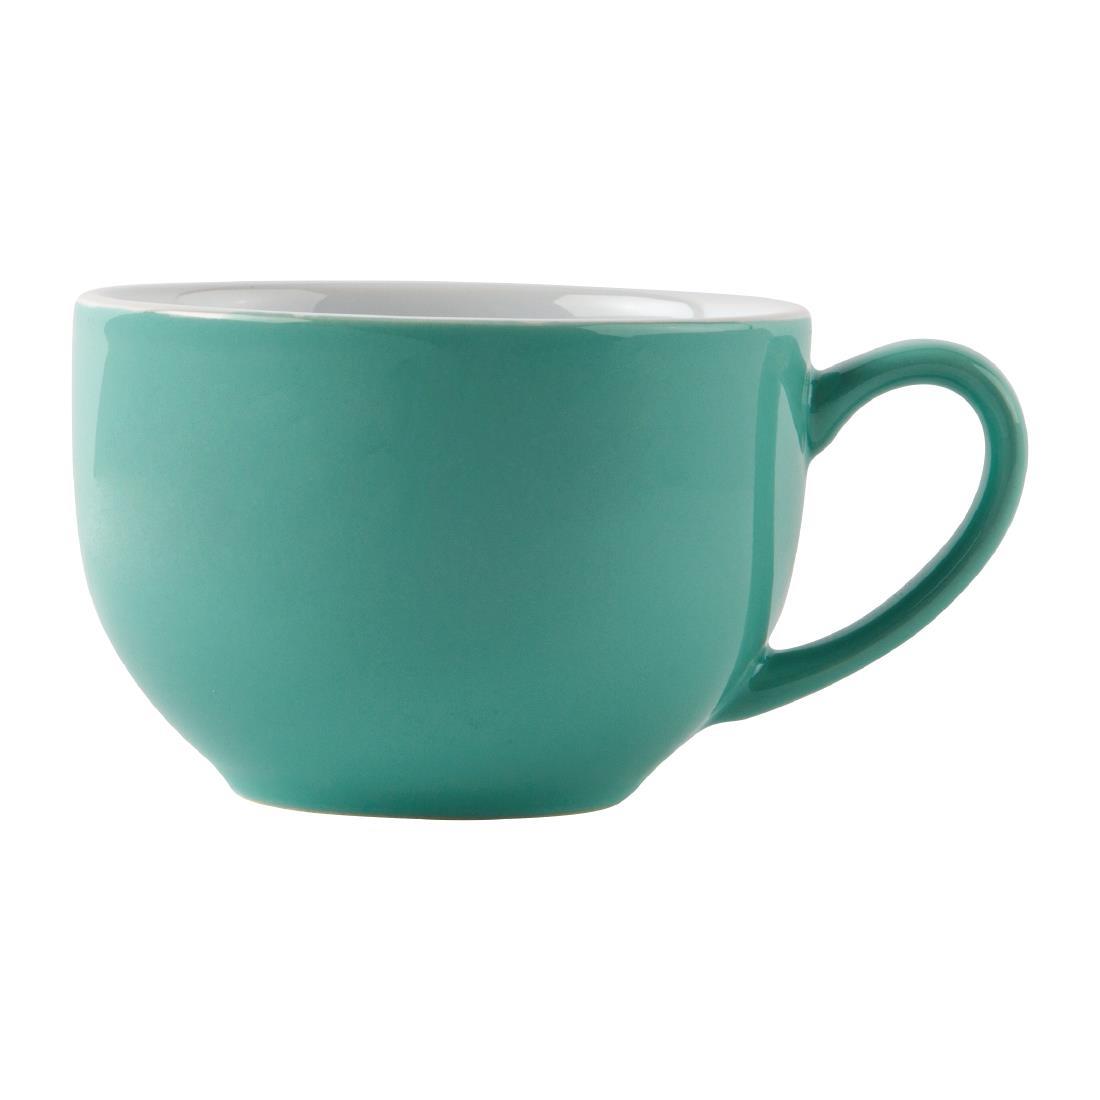 Olympia Cafe Cappuccino Cups Aqua 340ml (Pack of 12) - GL461  - 4